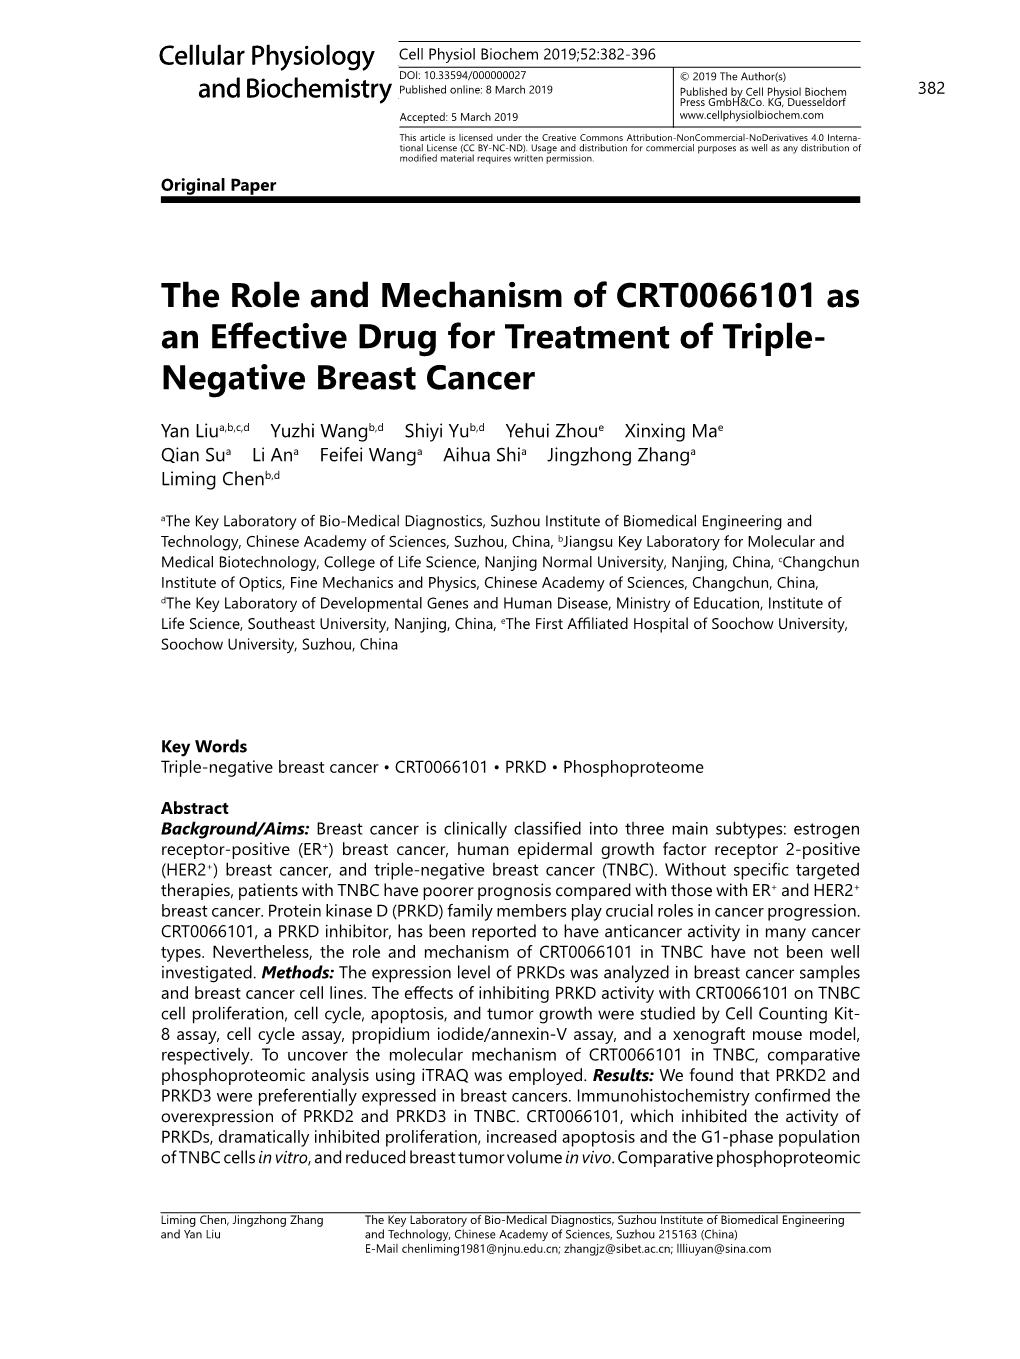 The Role and Mechanism of CRT0066101 As an Effective Drug for Treatment of Triple- Negative Breast Cancer